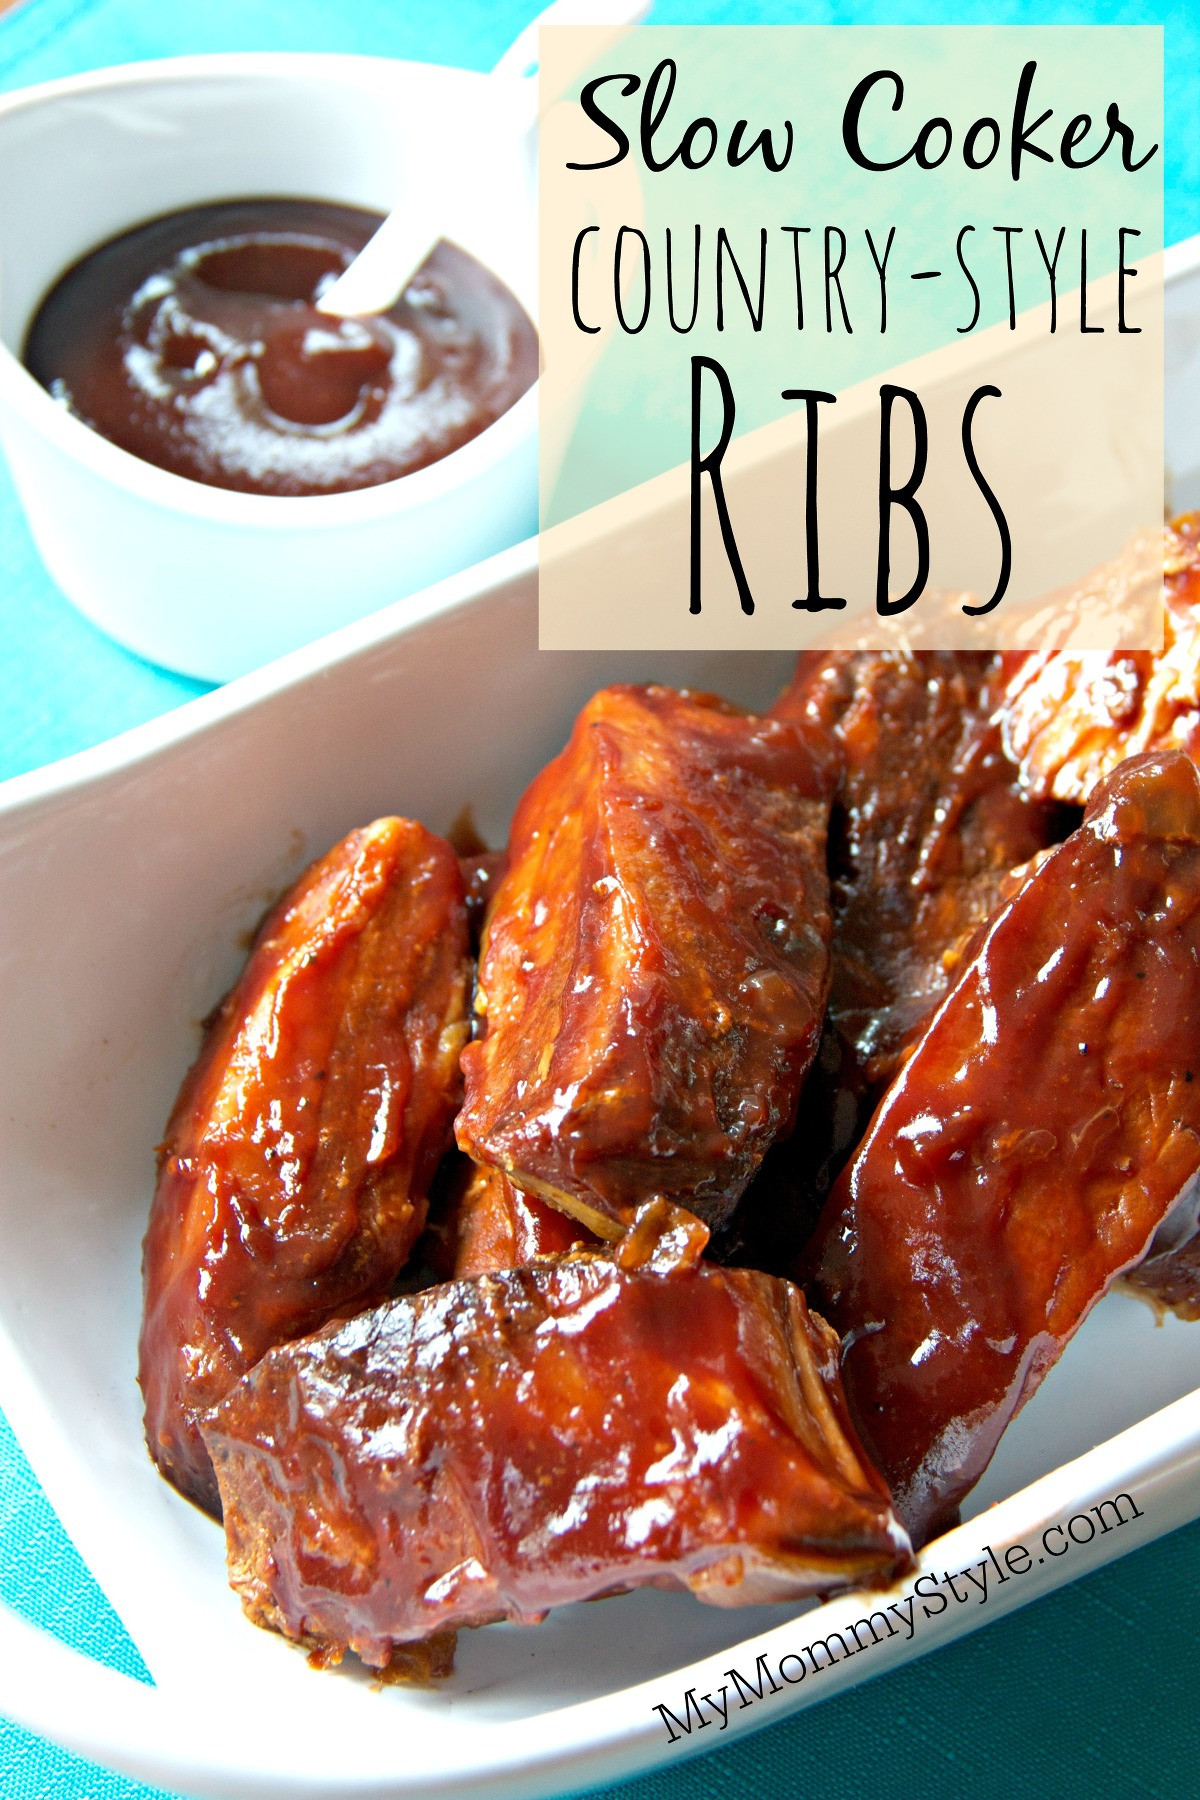 Boneless Country Style Pork Ribs Slow Cooker
 Slow Cooker Country Style Ribs My Mommy Style